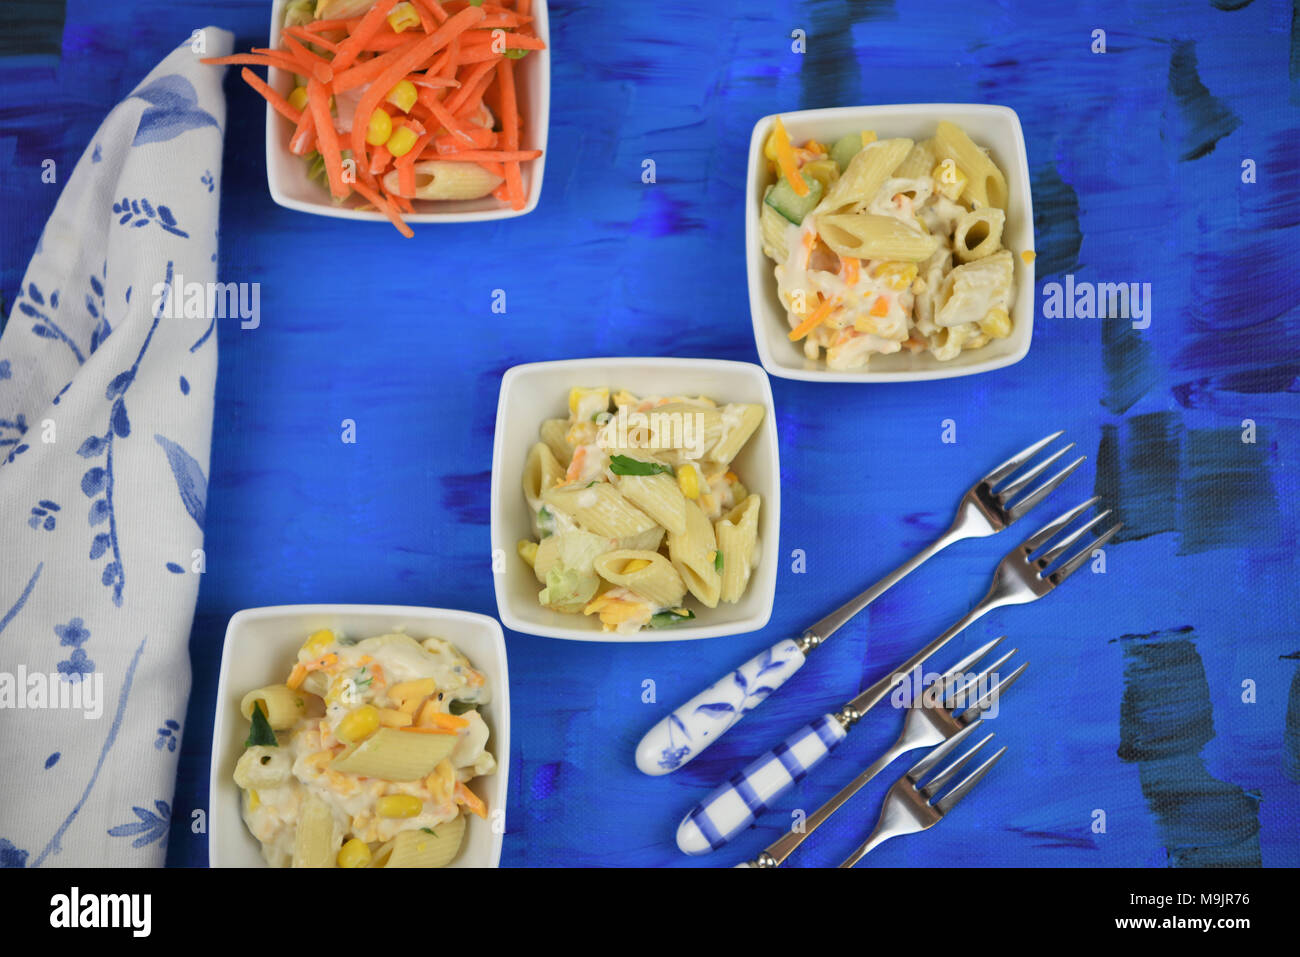 flat lay with dishes of pasta salad Stock Photo